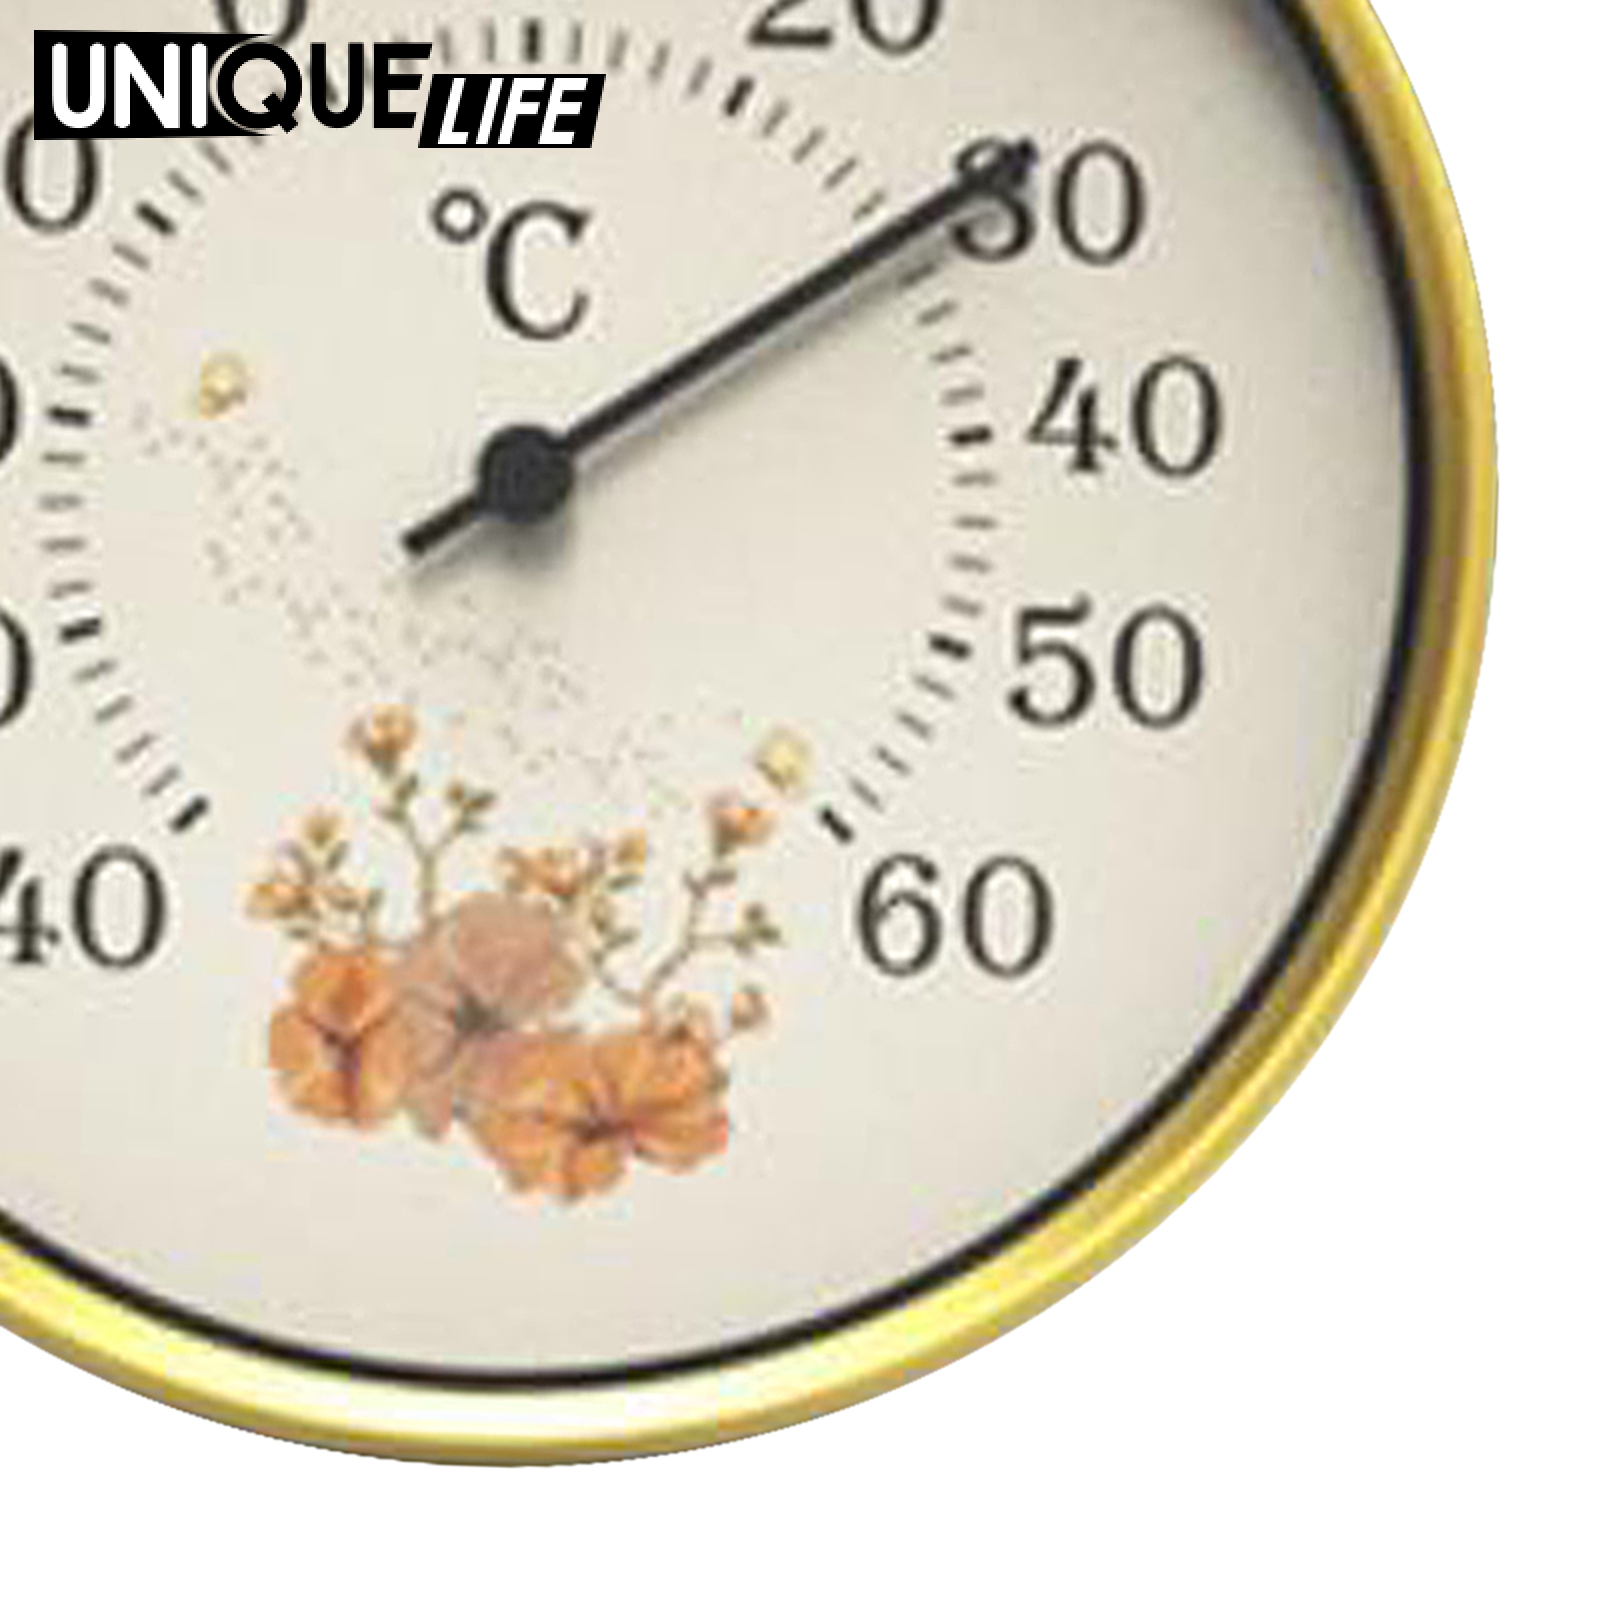 [Unique Life]Household Analog Sauna Thermometer Metal Outdoor Indoor Wall Pool Kitchen style